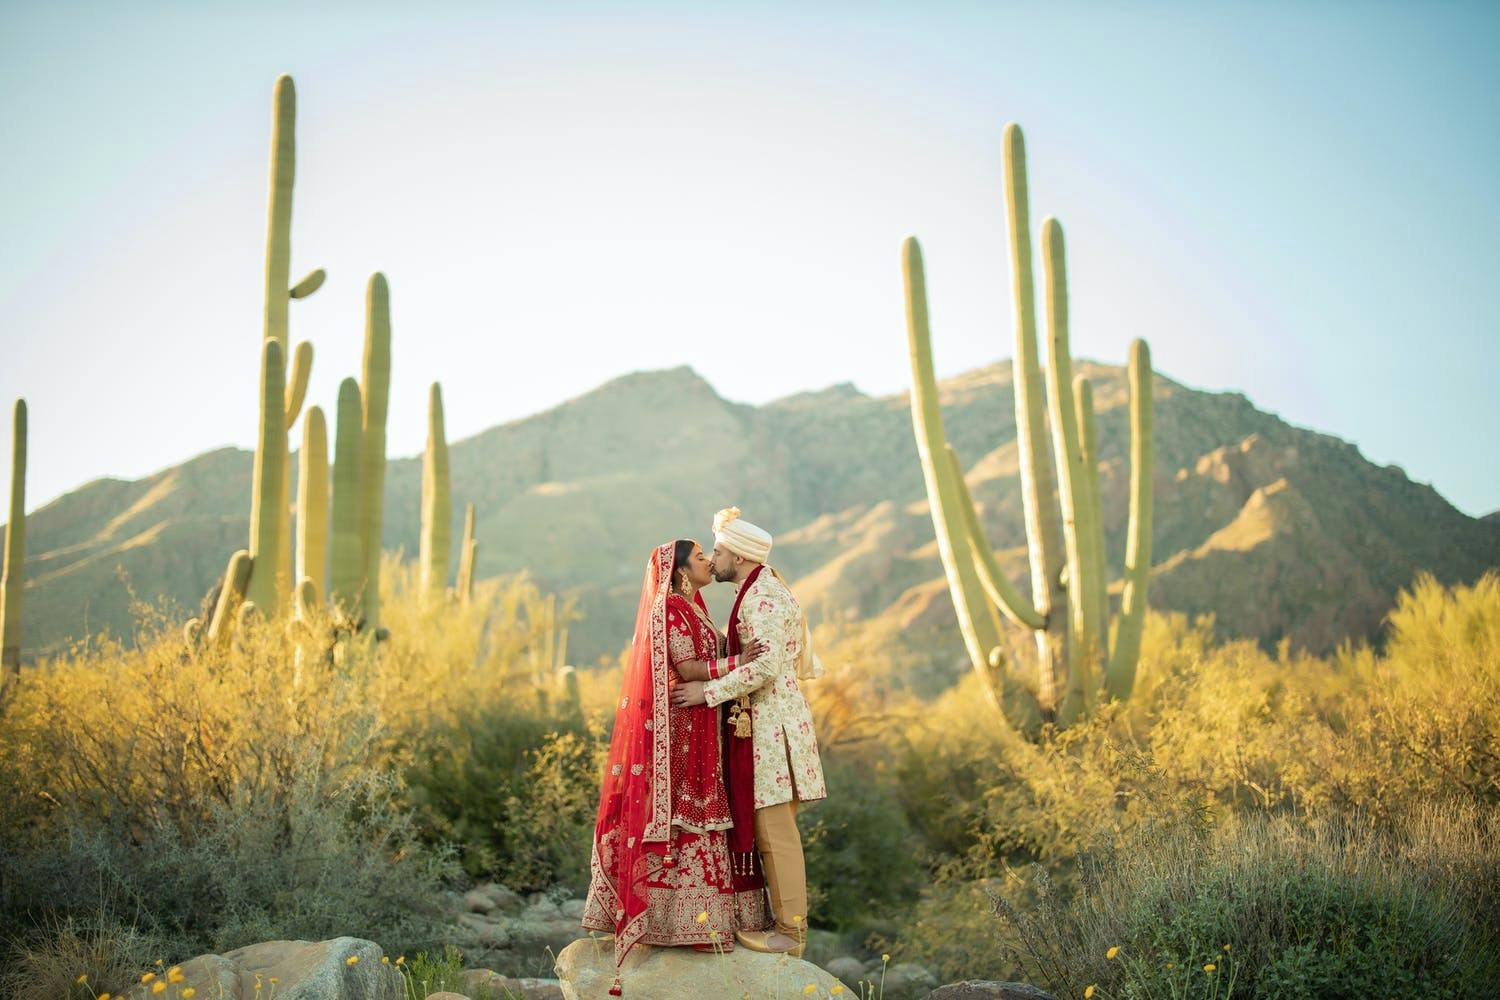 Hindu wedding first look set between two towering cacti with desert mountains in backdrop | PartySlate